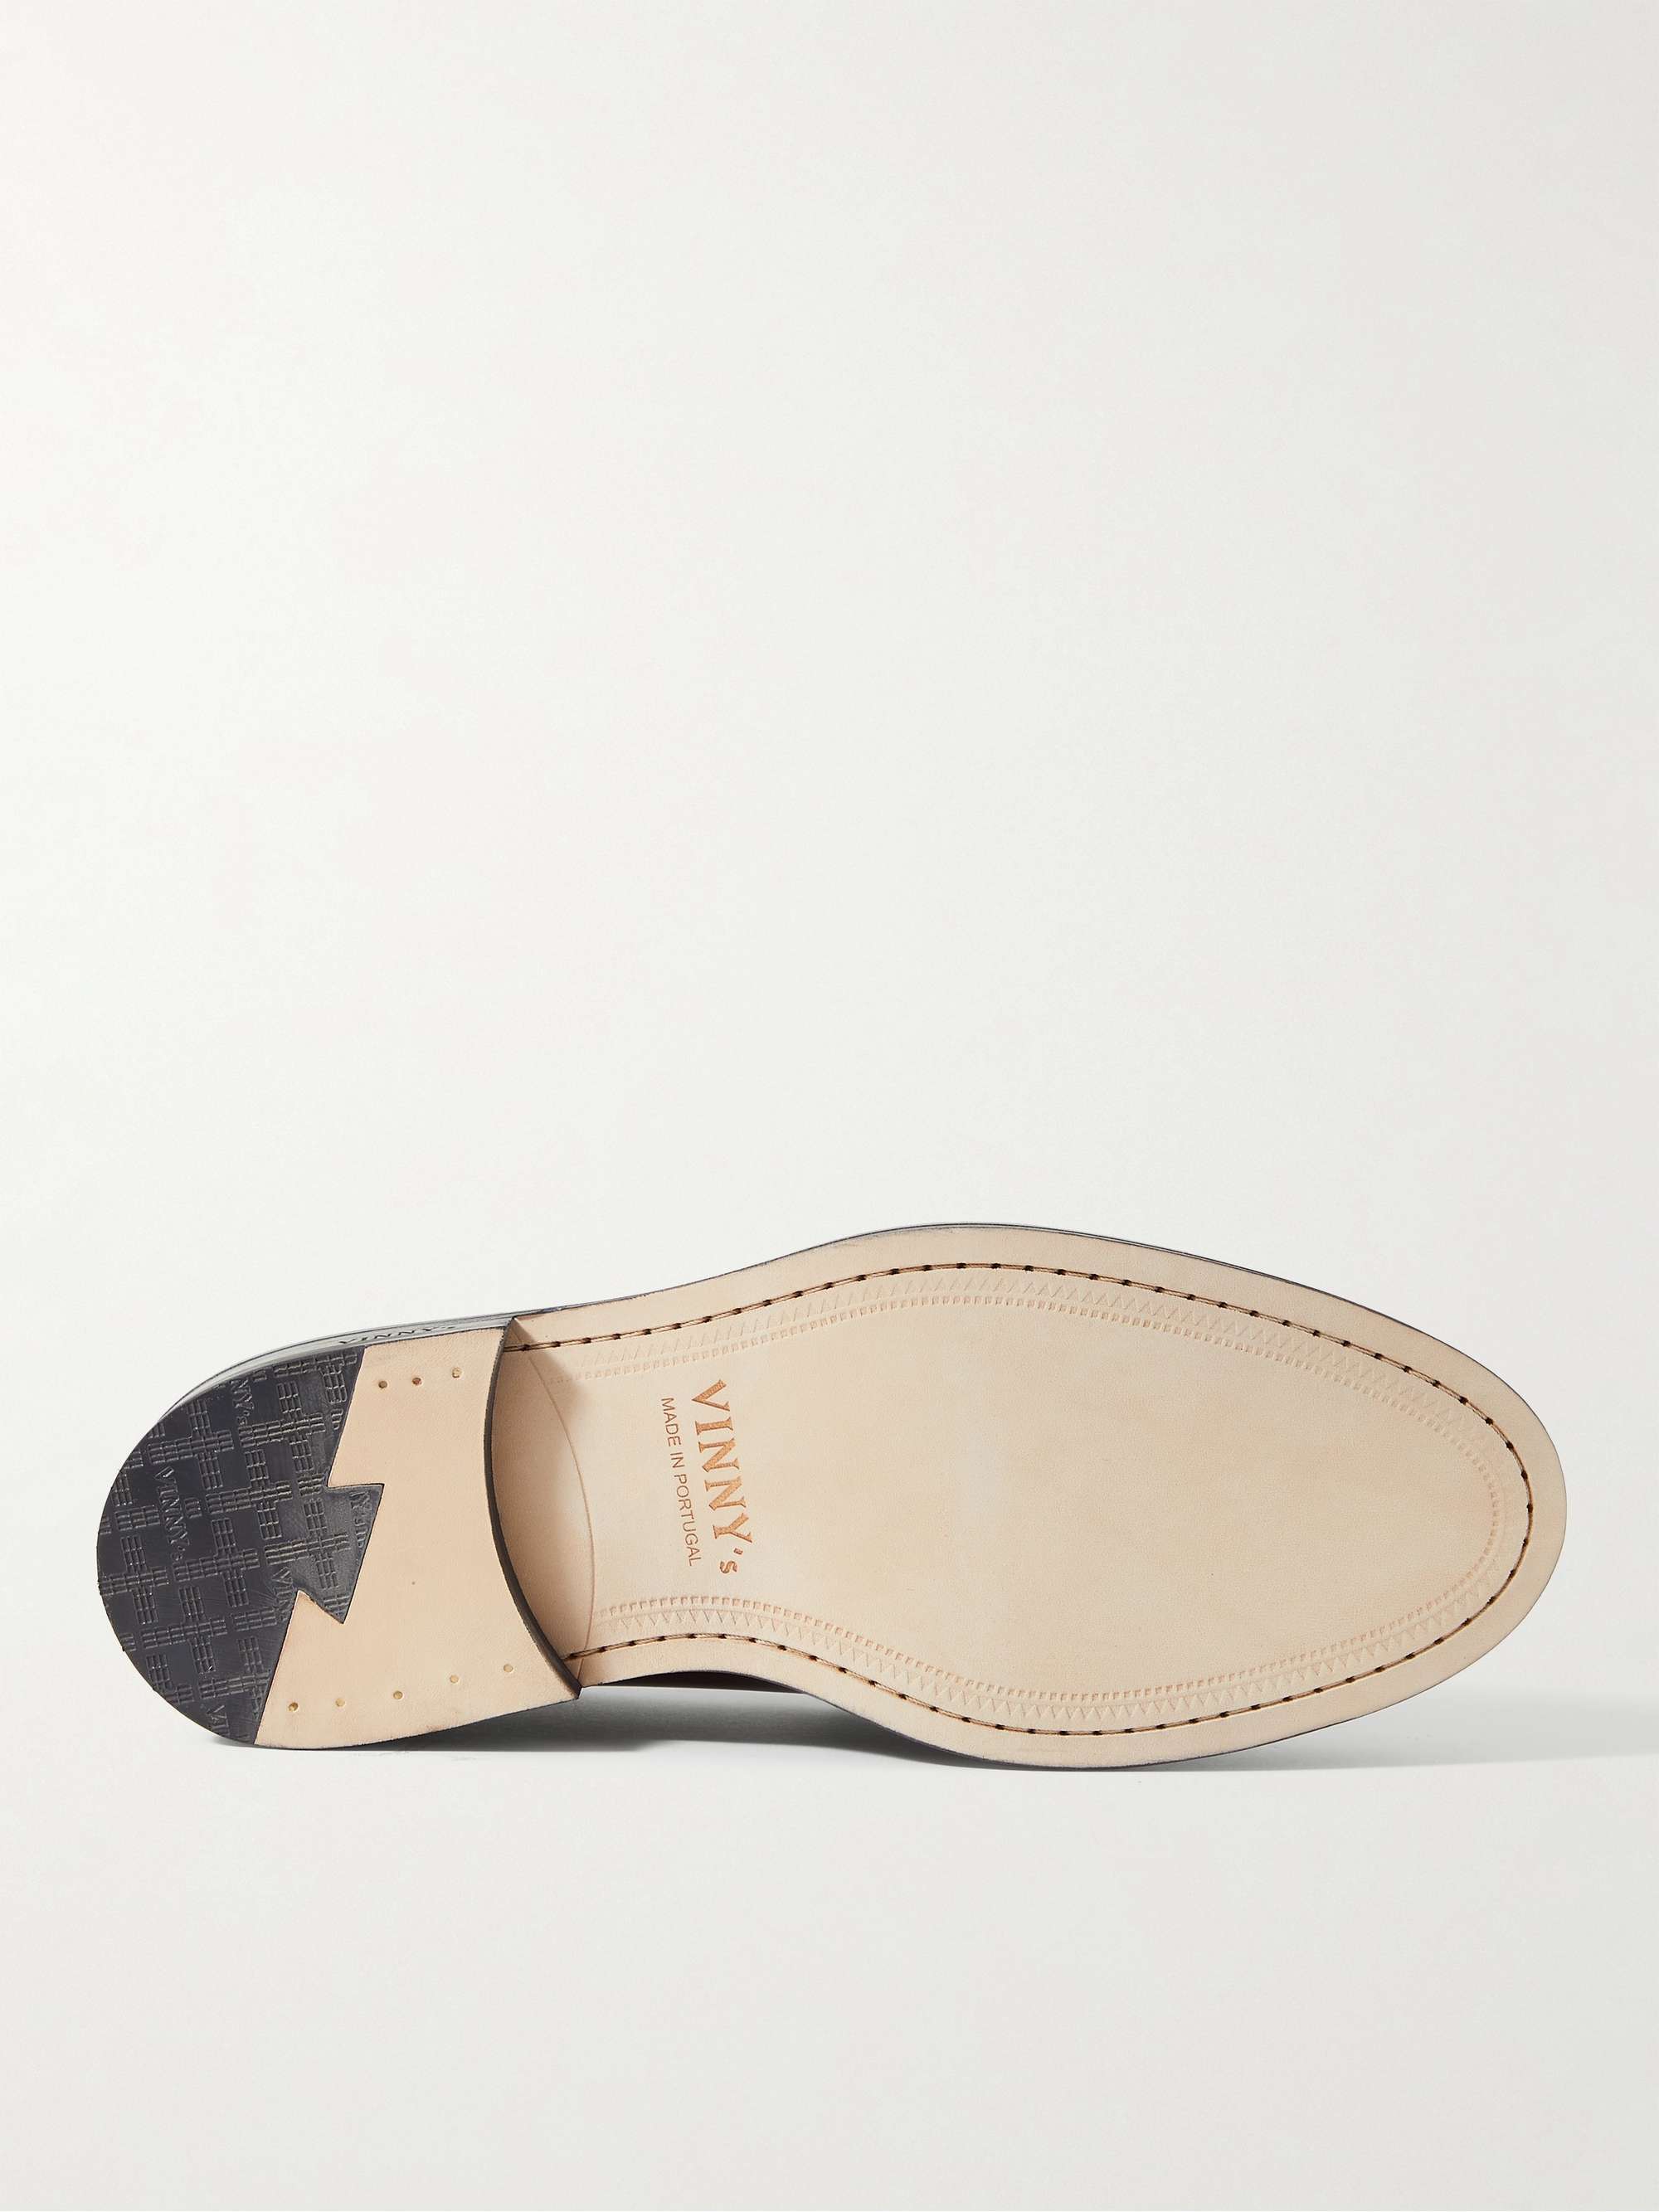 VINNY'S Townee Leather Penny Loafers